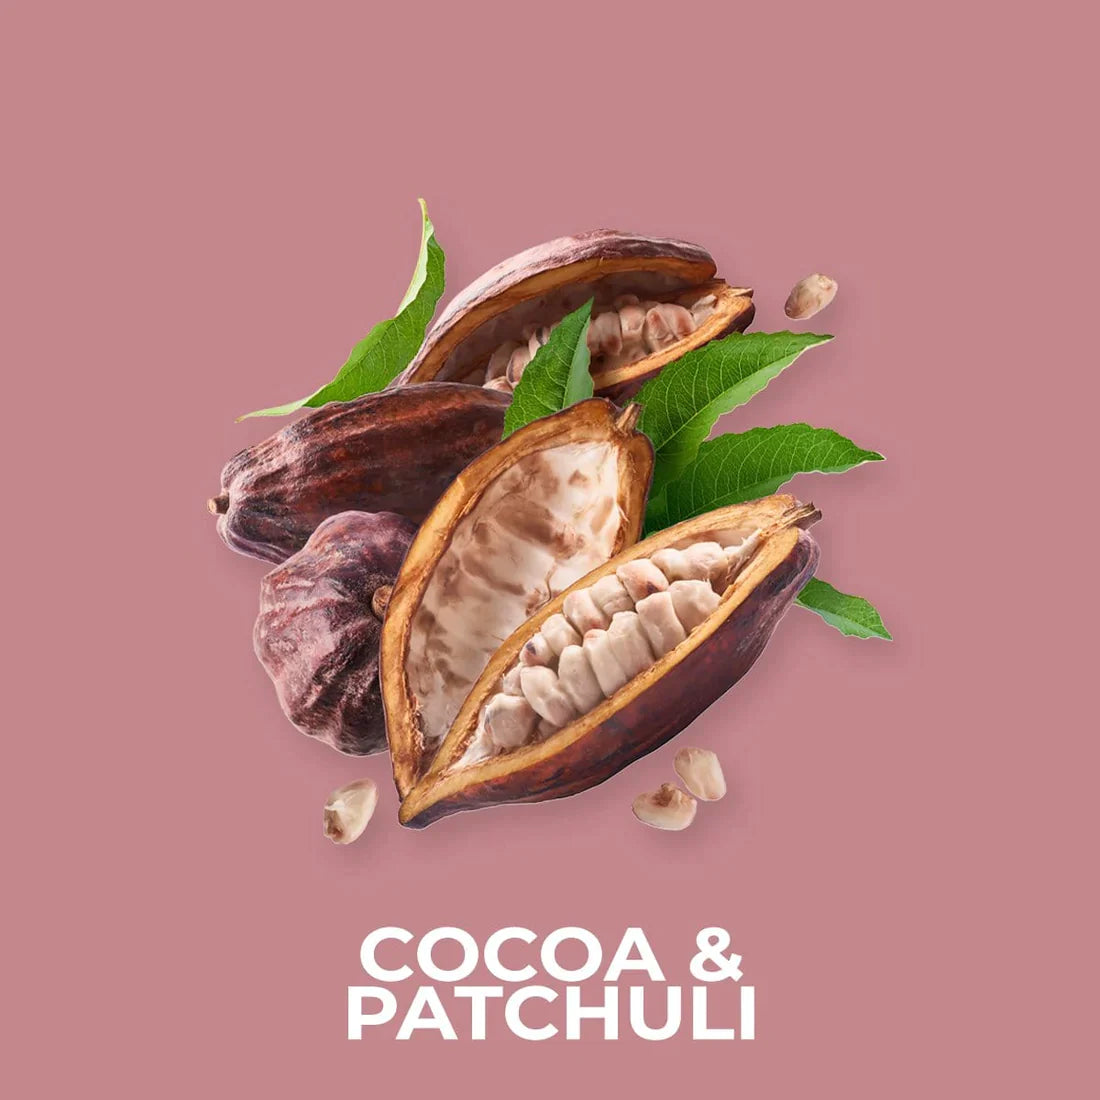 Cocoa & Patchouli 50g Snap Bar